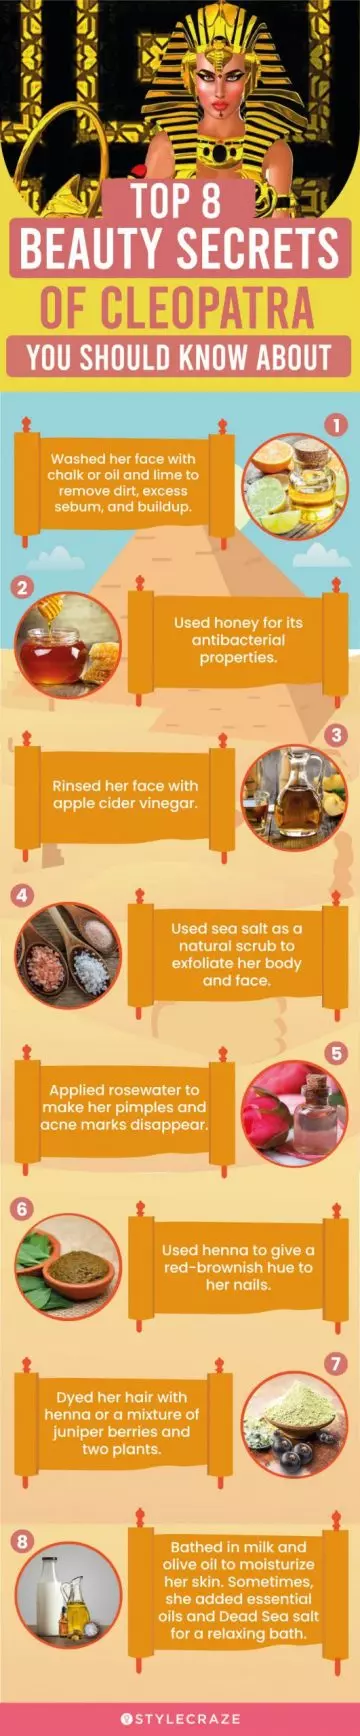 top 8 beauty secret of cleopatra you should know about (infographic)